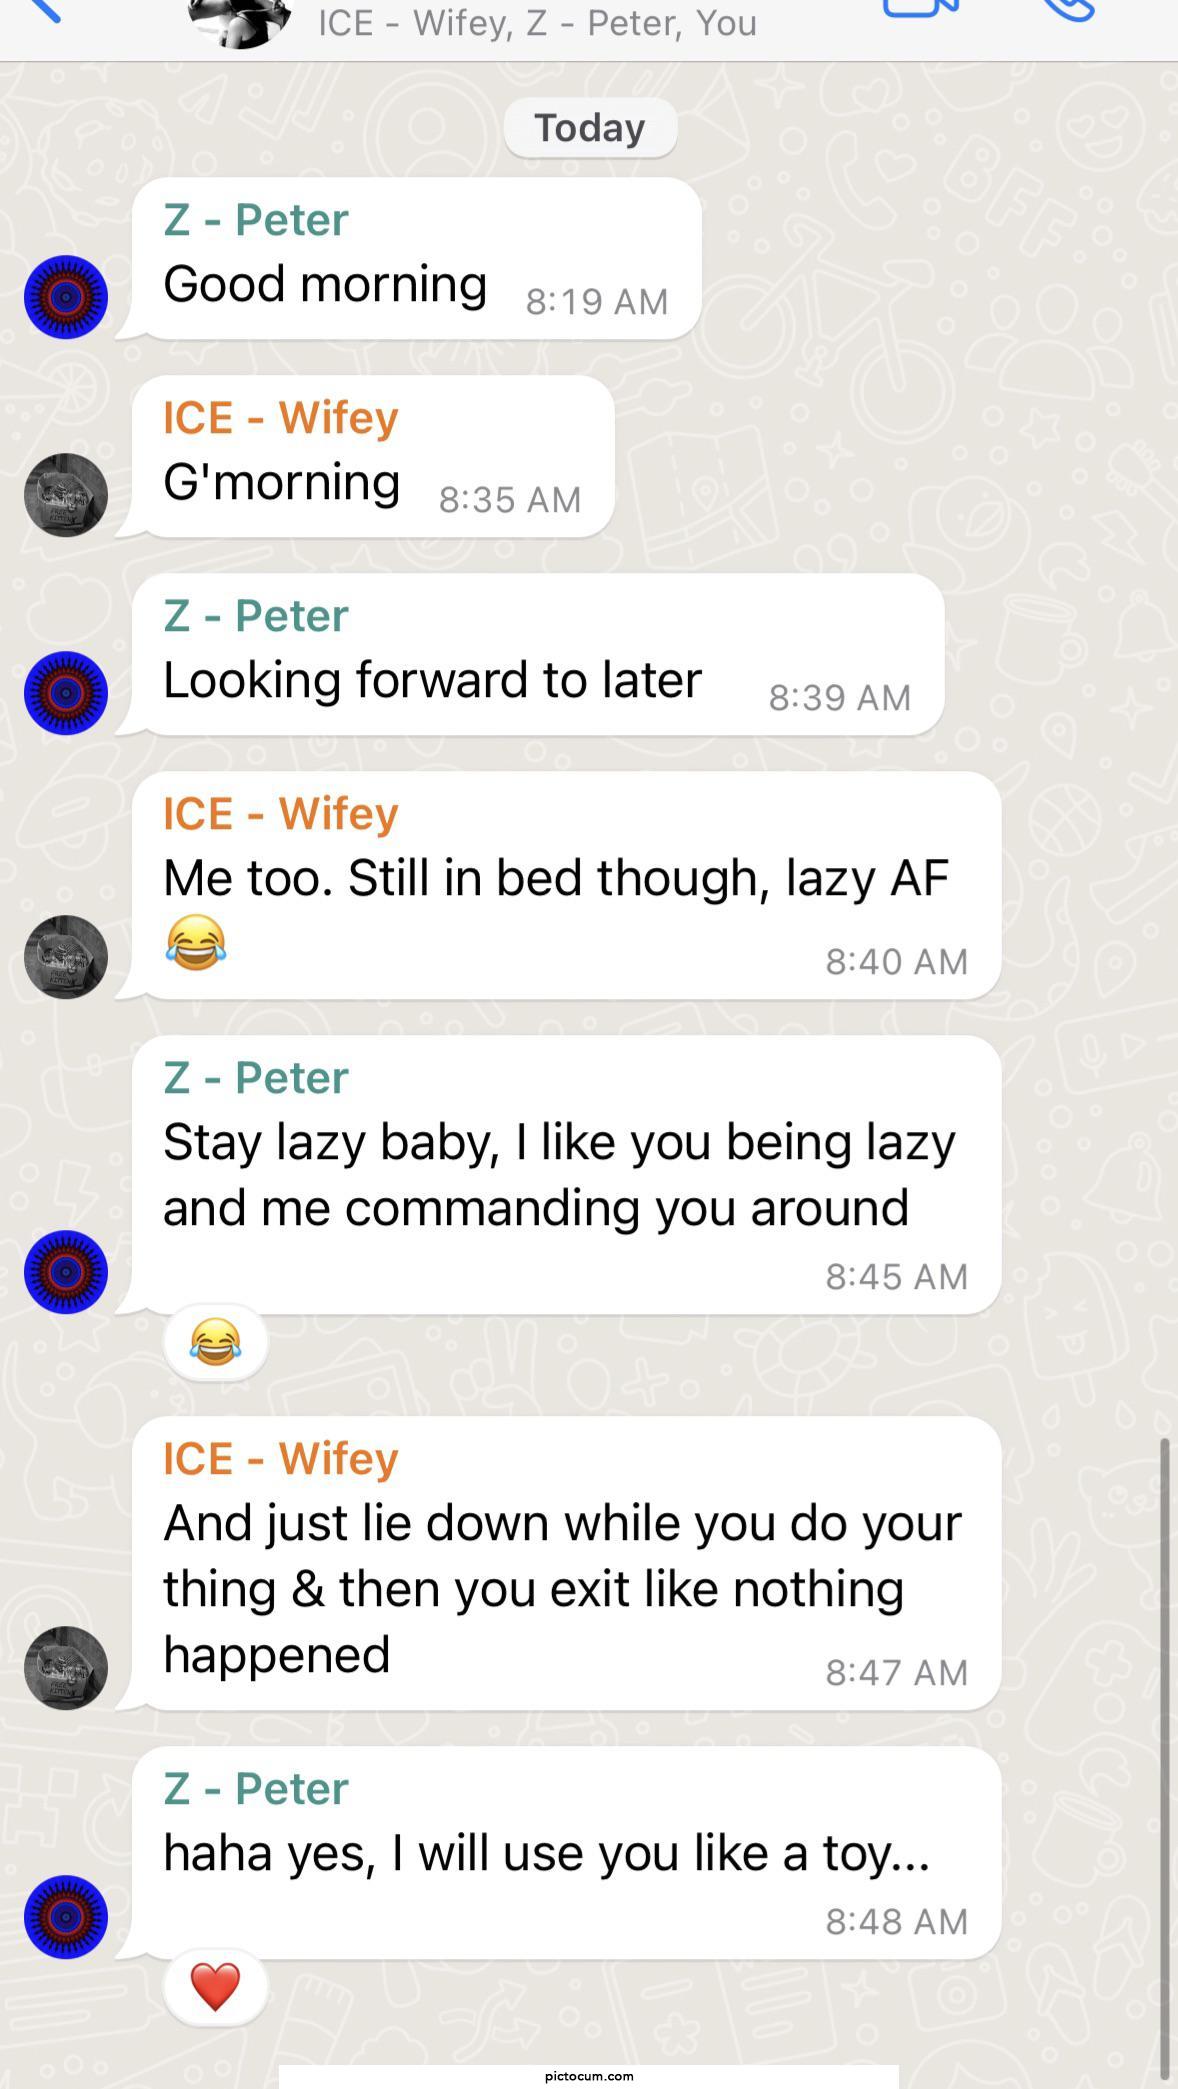 Bull is on the way to fuck Hotwifey at home while Cuckold is in the office. I will be thinking on what they are doing while in important meetings in the office